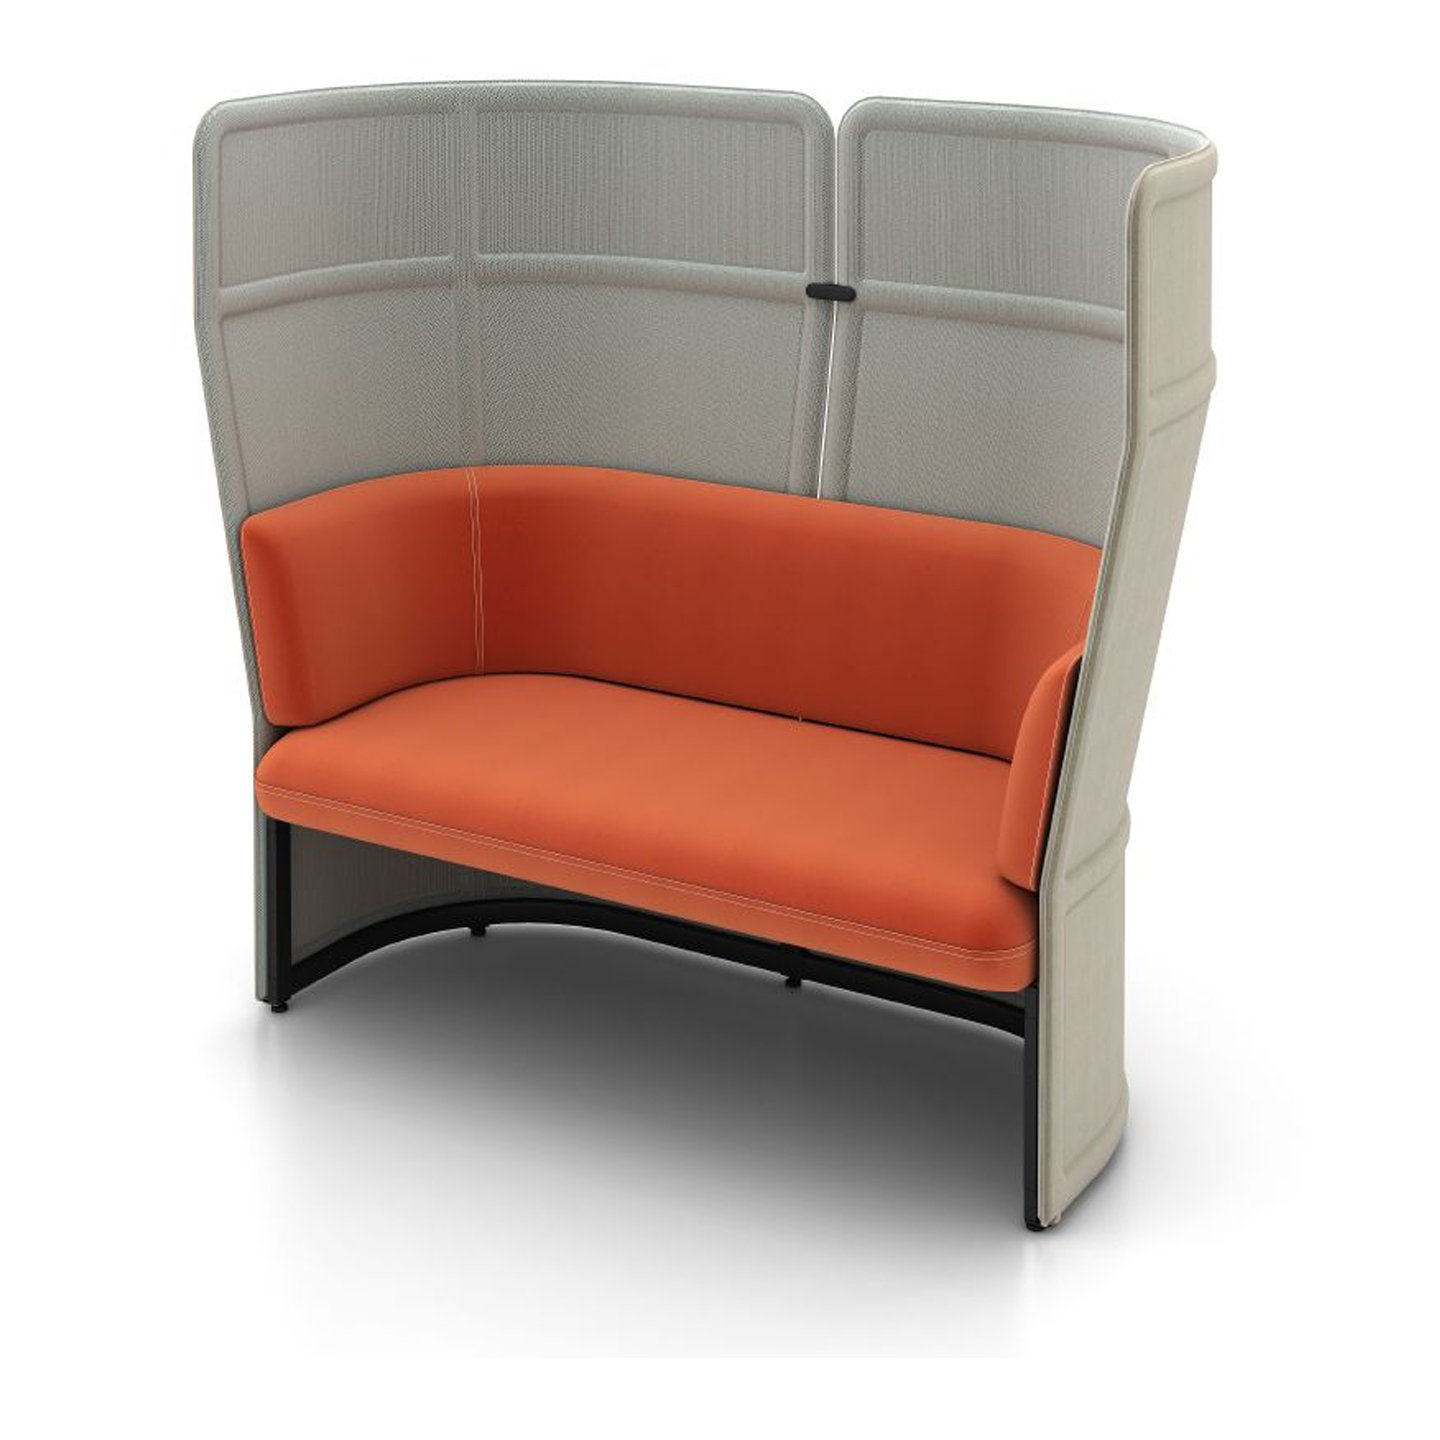 Haworth Openest Single Booth in grey color with orange seating